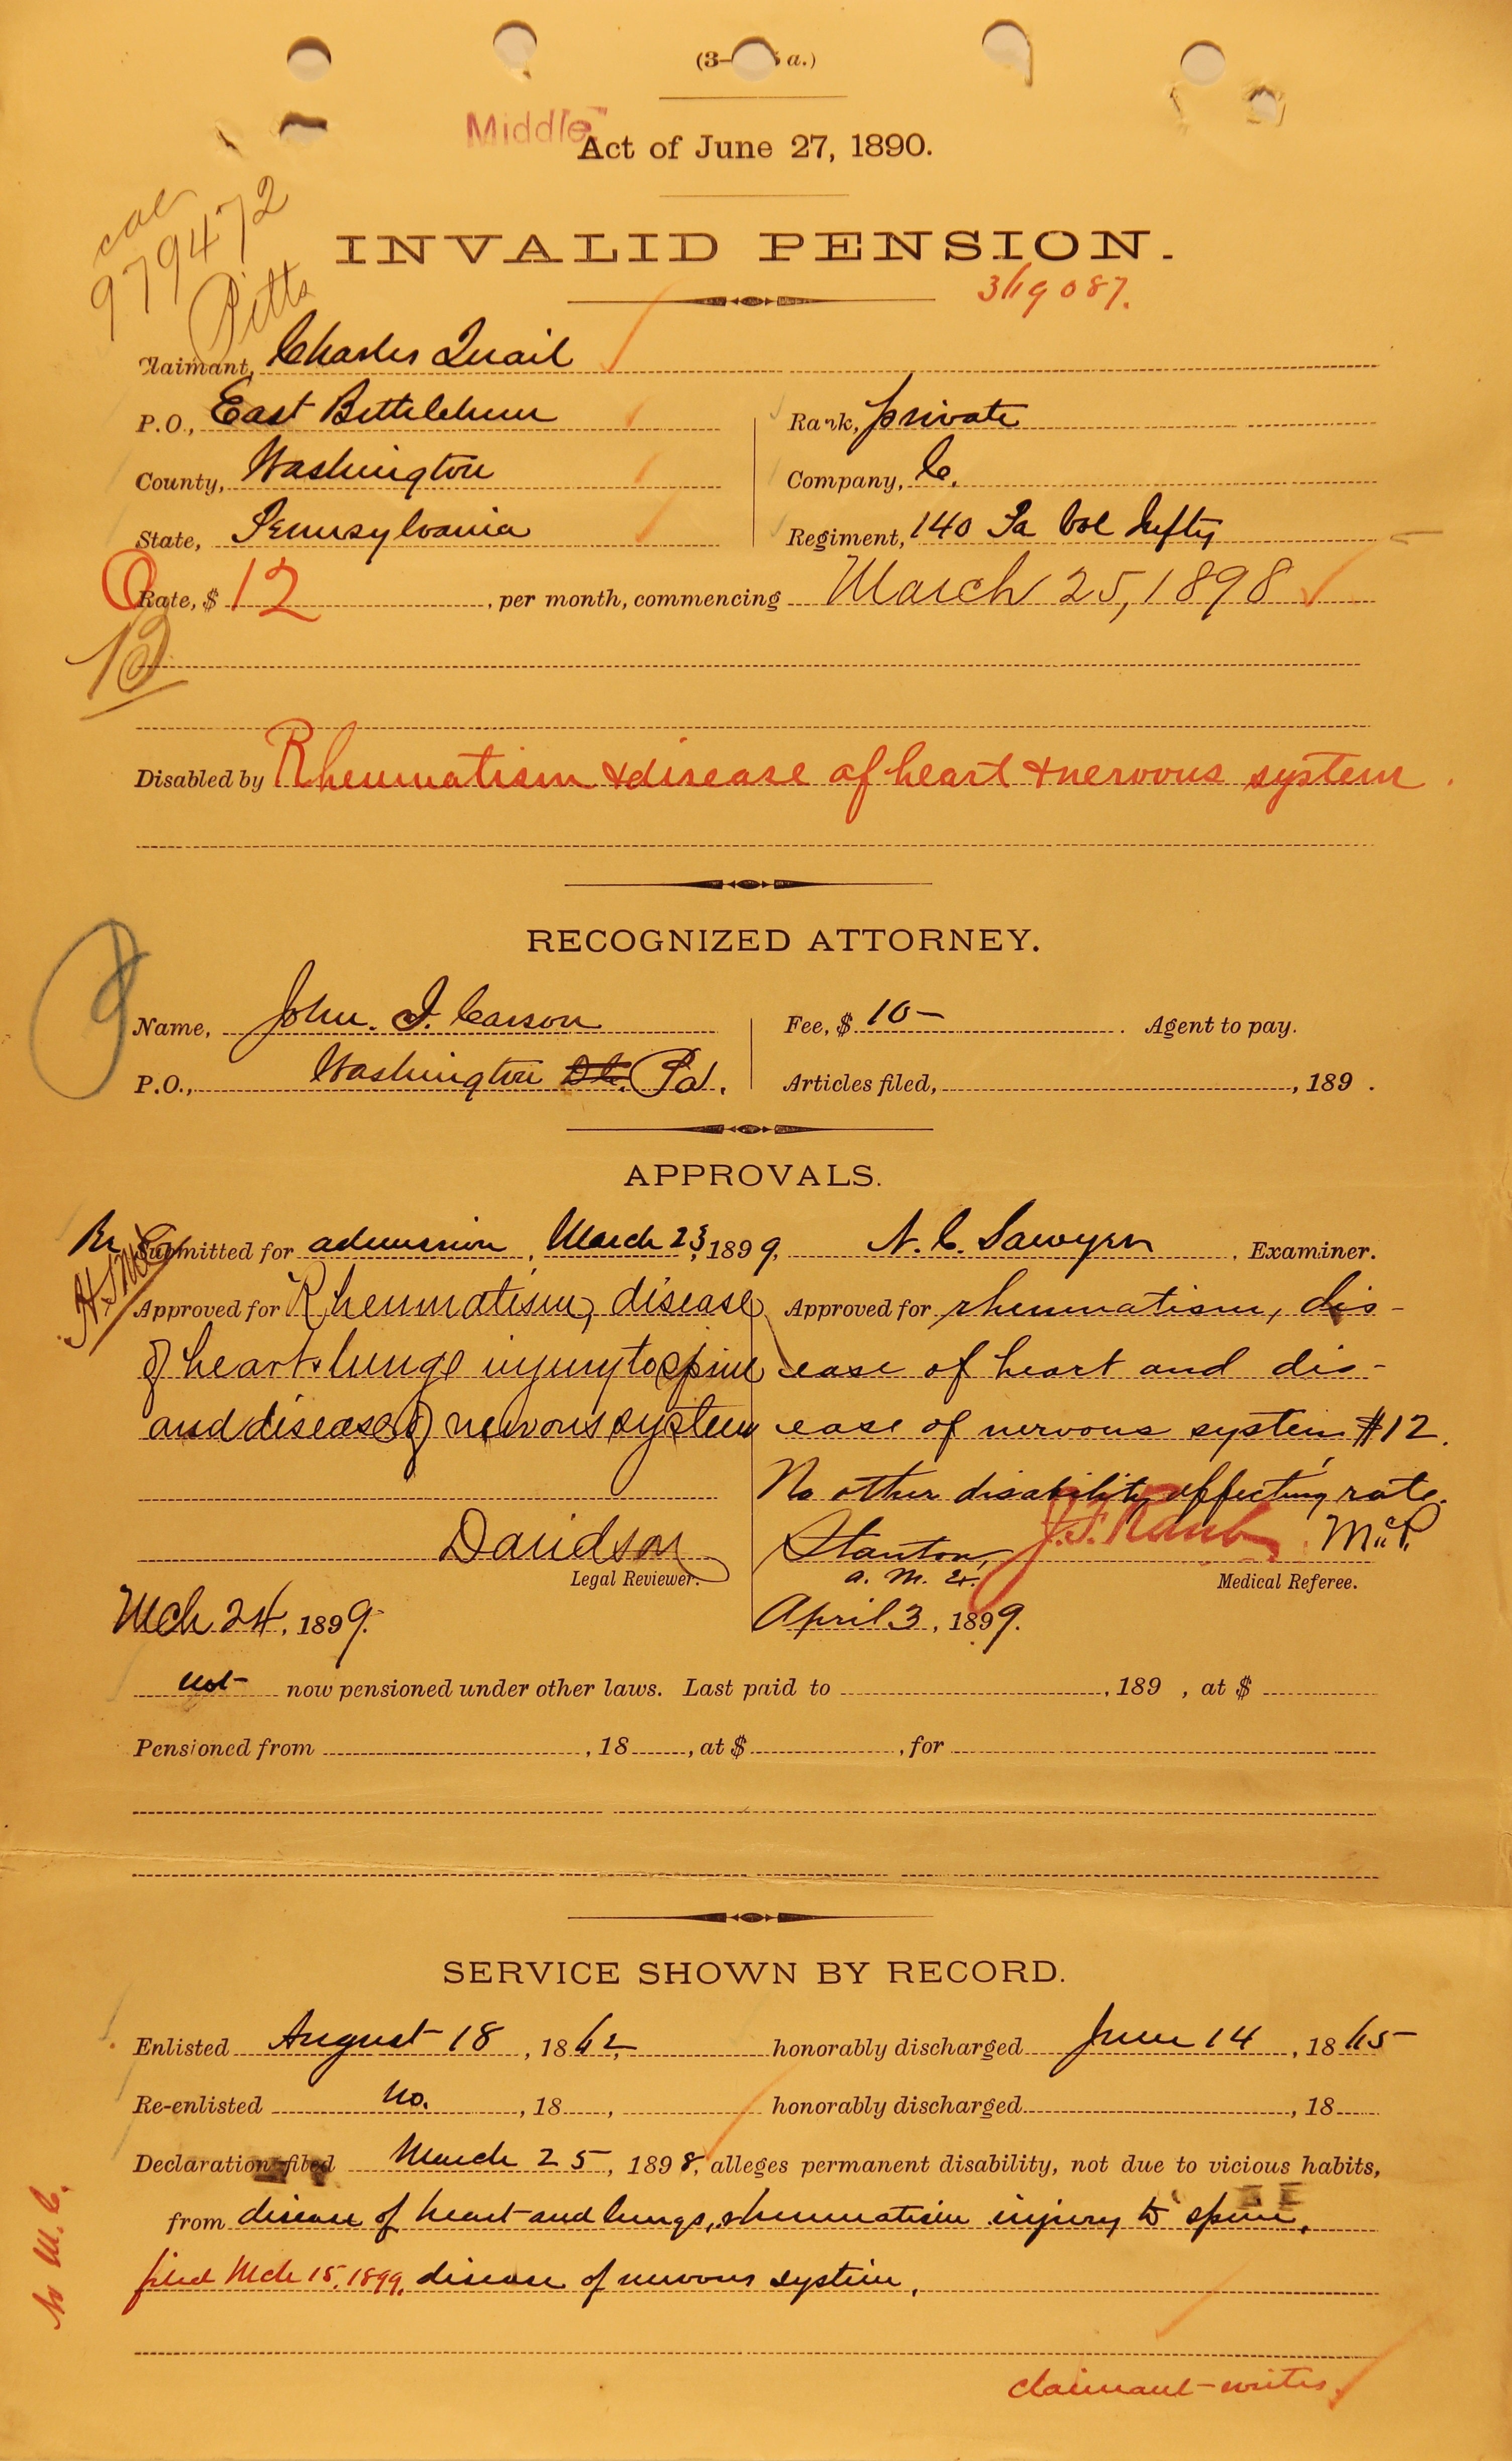 A ruling granting a recruit's pension under the act of June 27, 1890